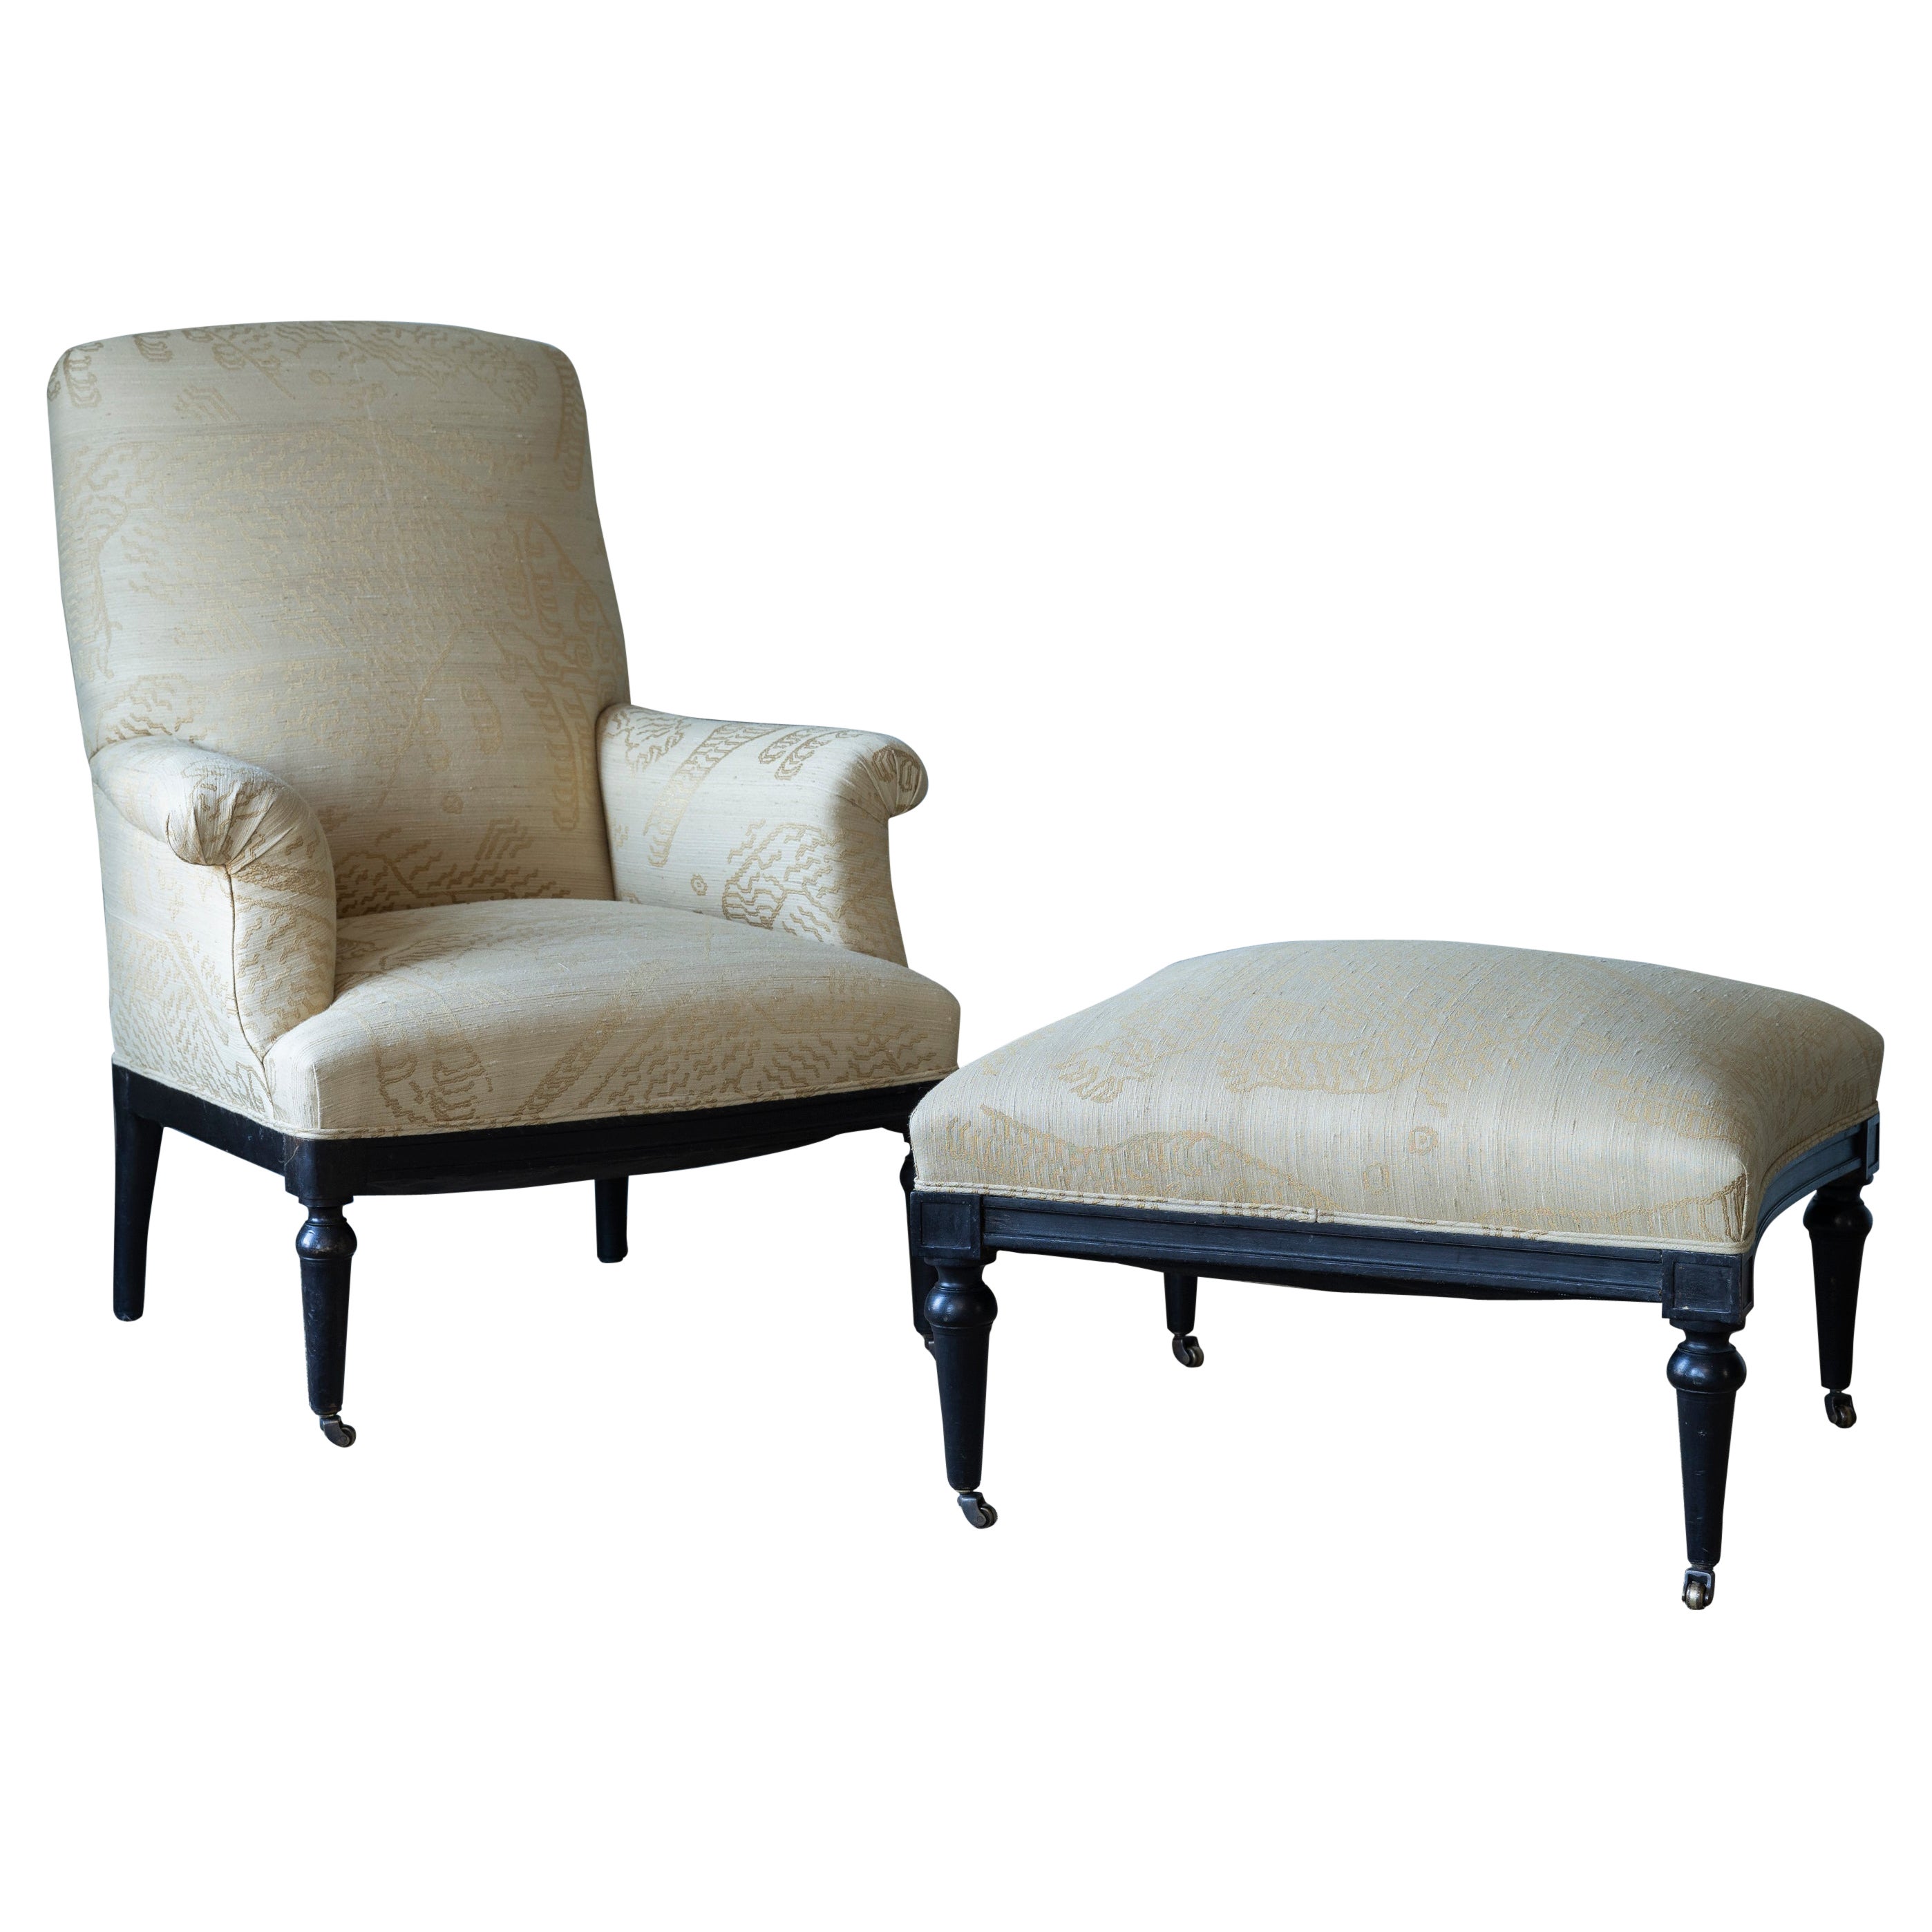 Beige English Chair and Ottoman